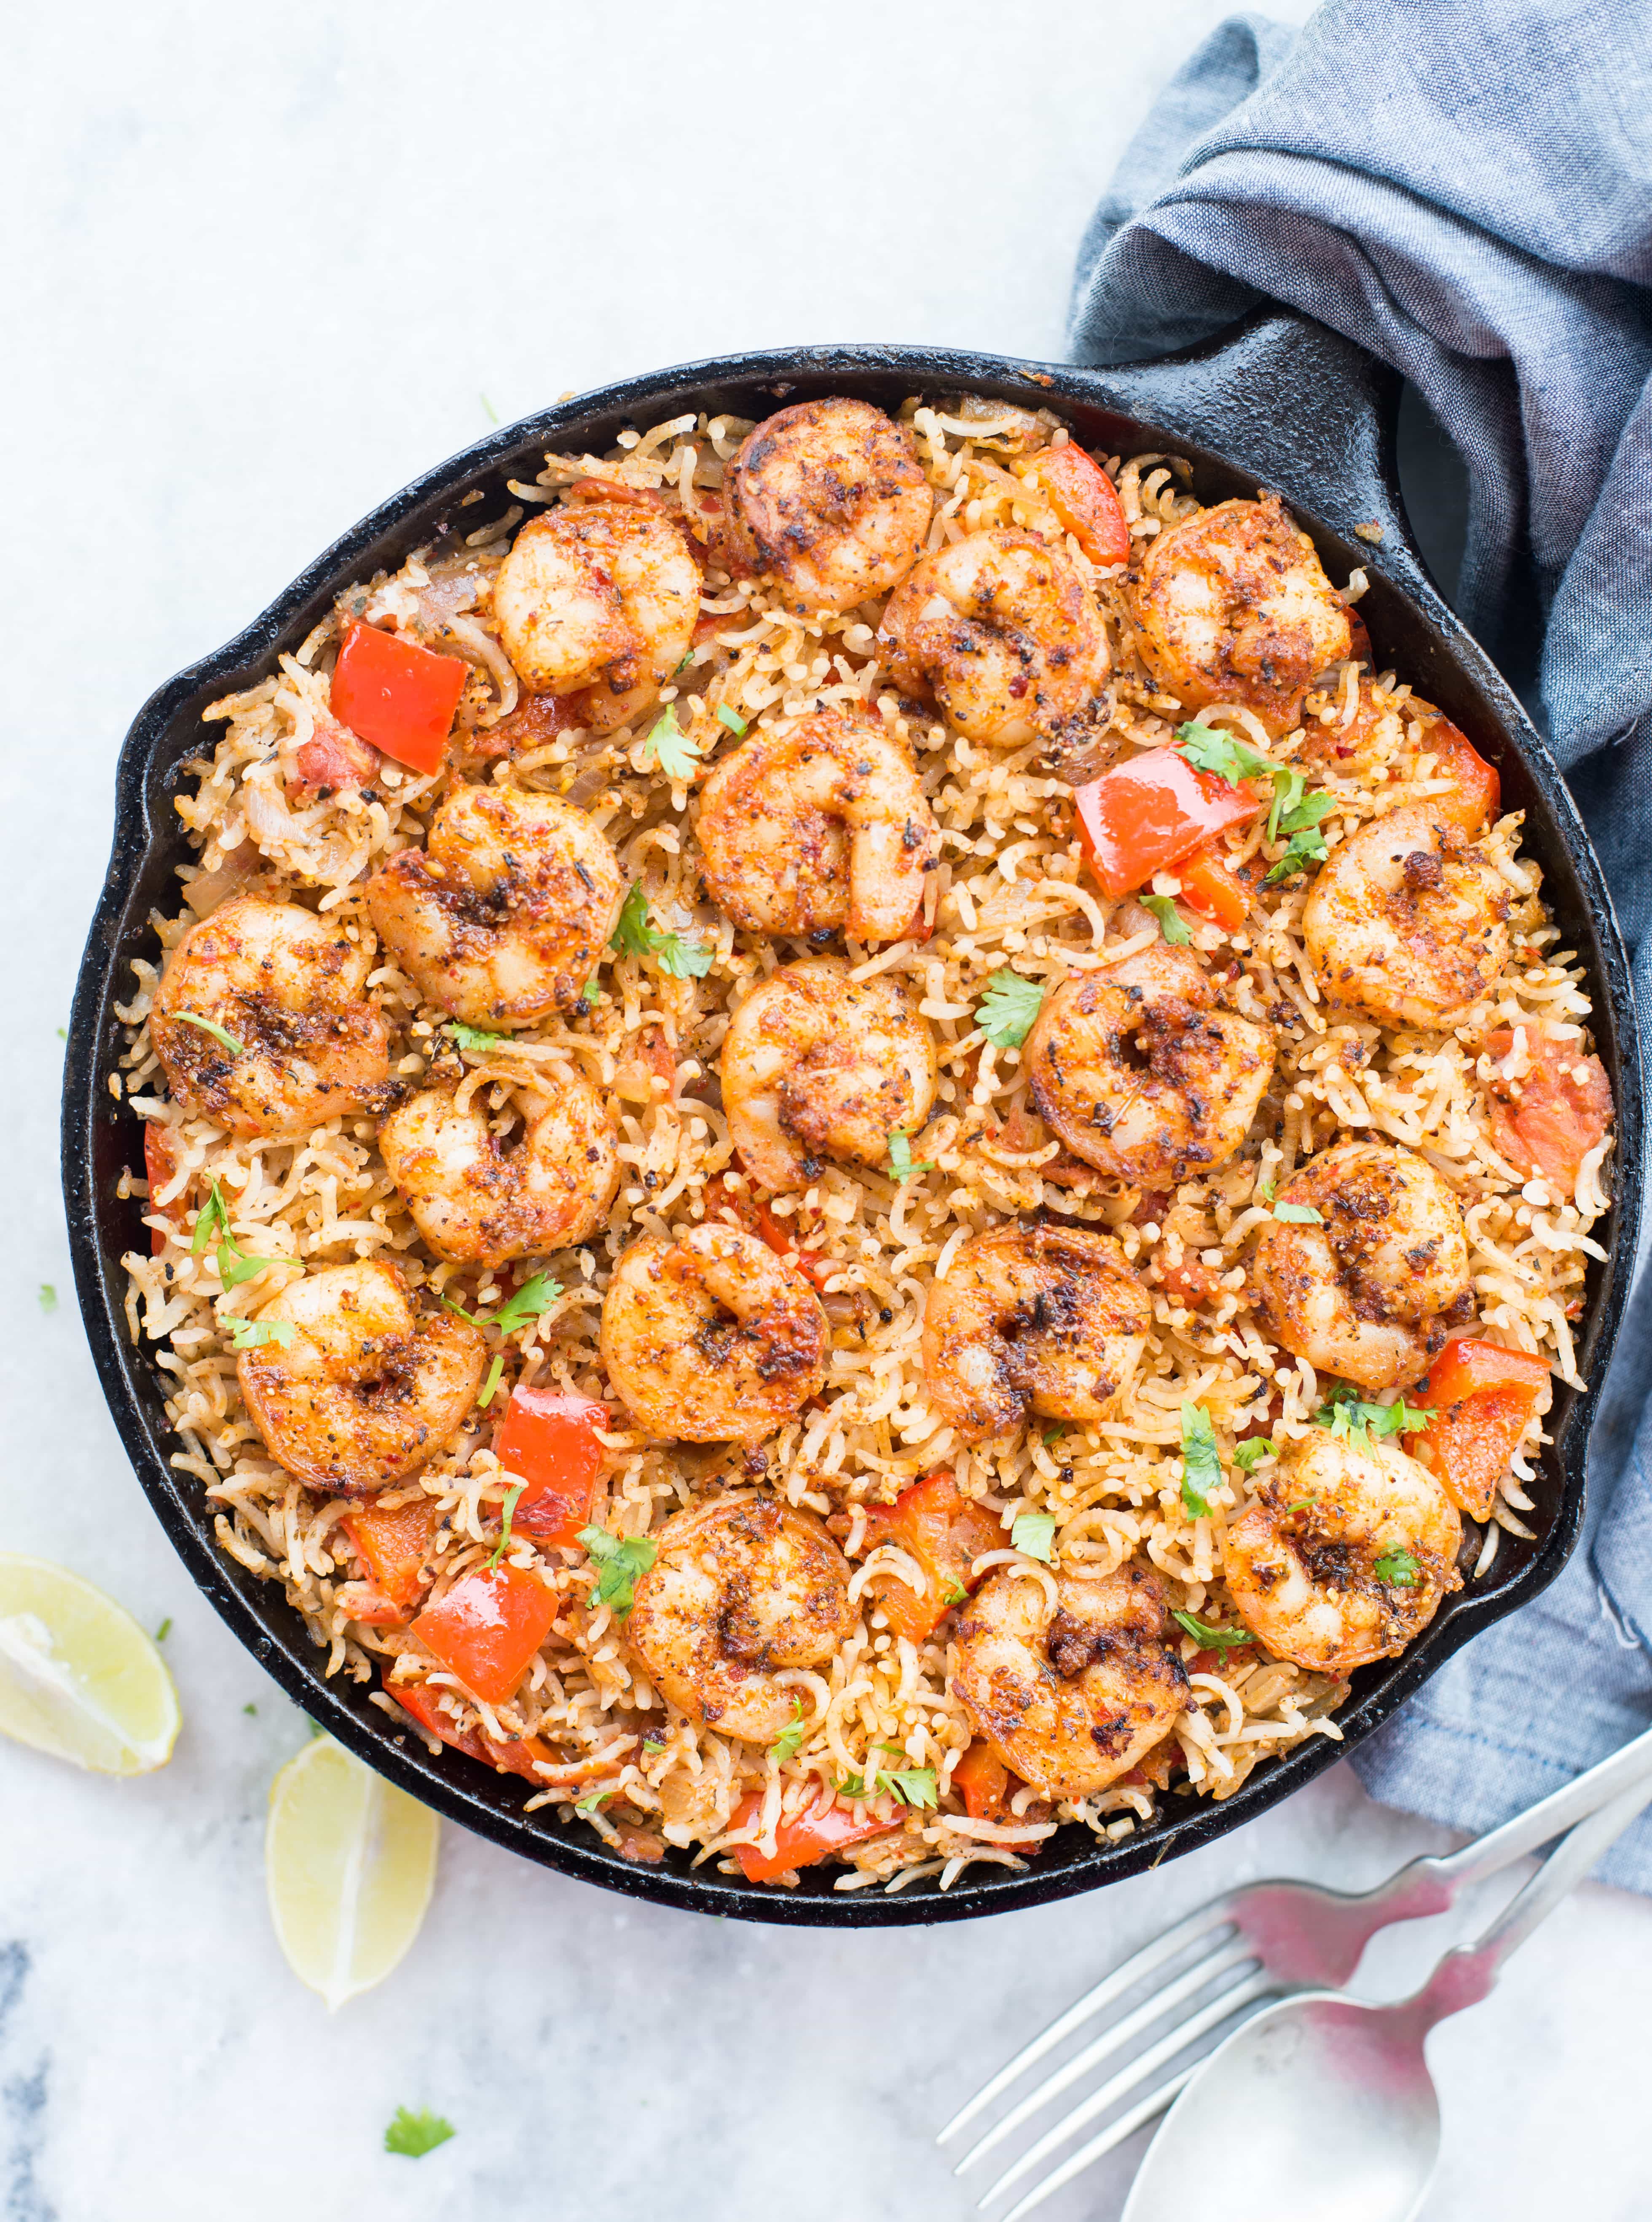 Cajun Shrimp and Rice Skillet are that one pan dinner recipe, your family is going to love. It is spicy with lots of flavour from Cajun Spice. A perfect Shrimp and rice recipe, that takes less than 30 minutes from stove to table.